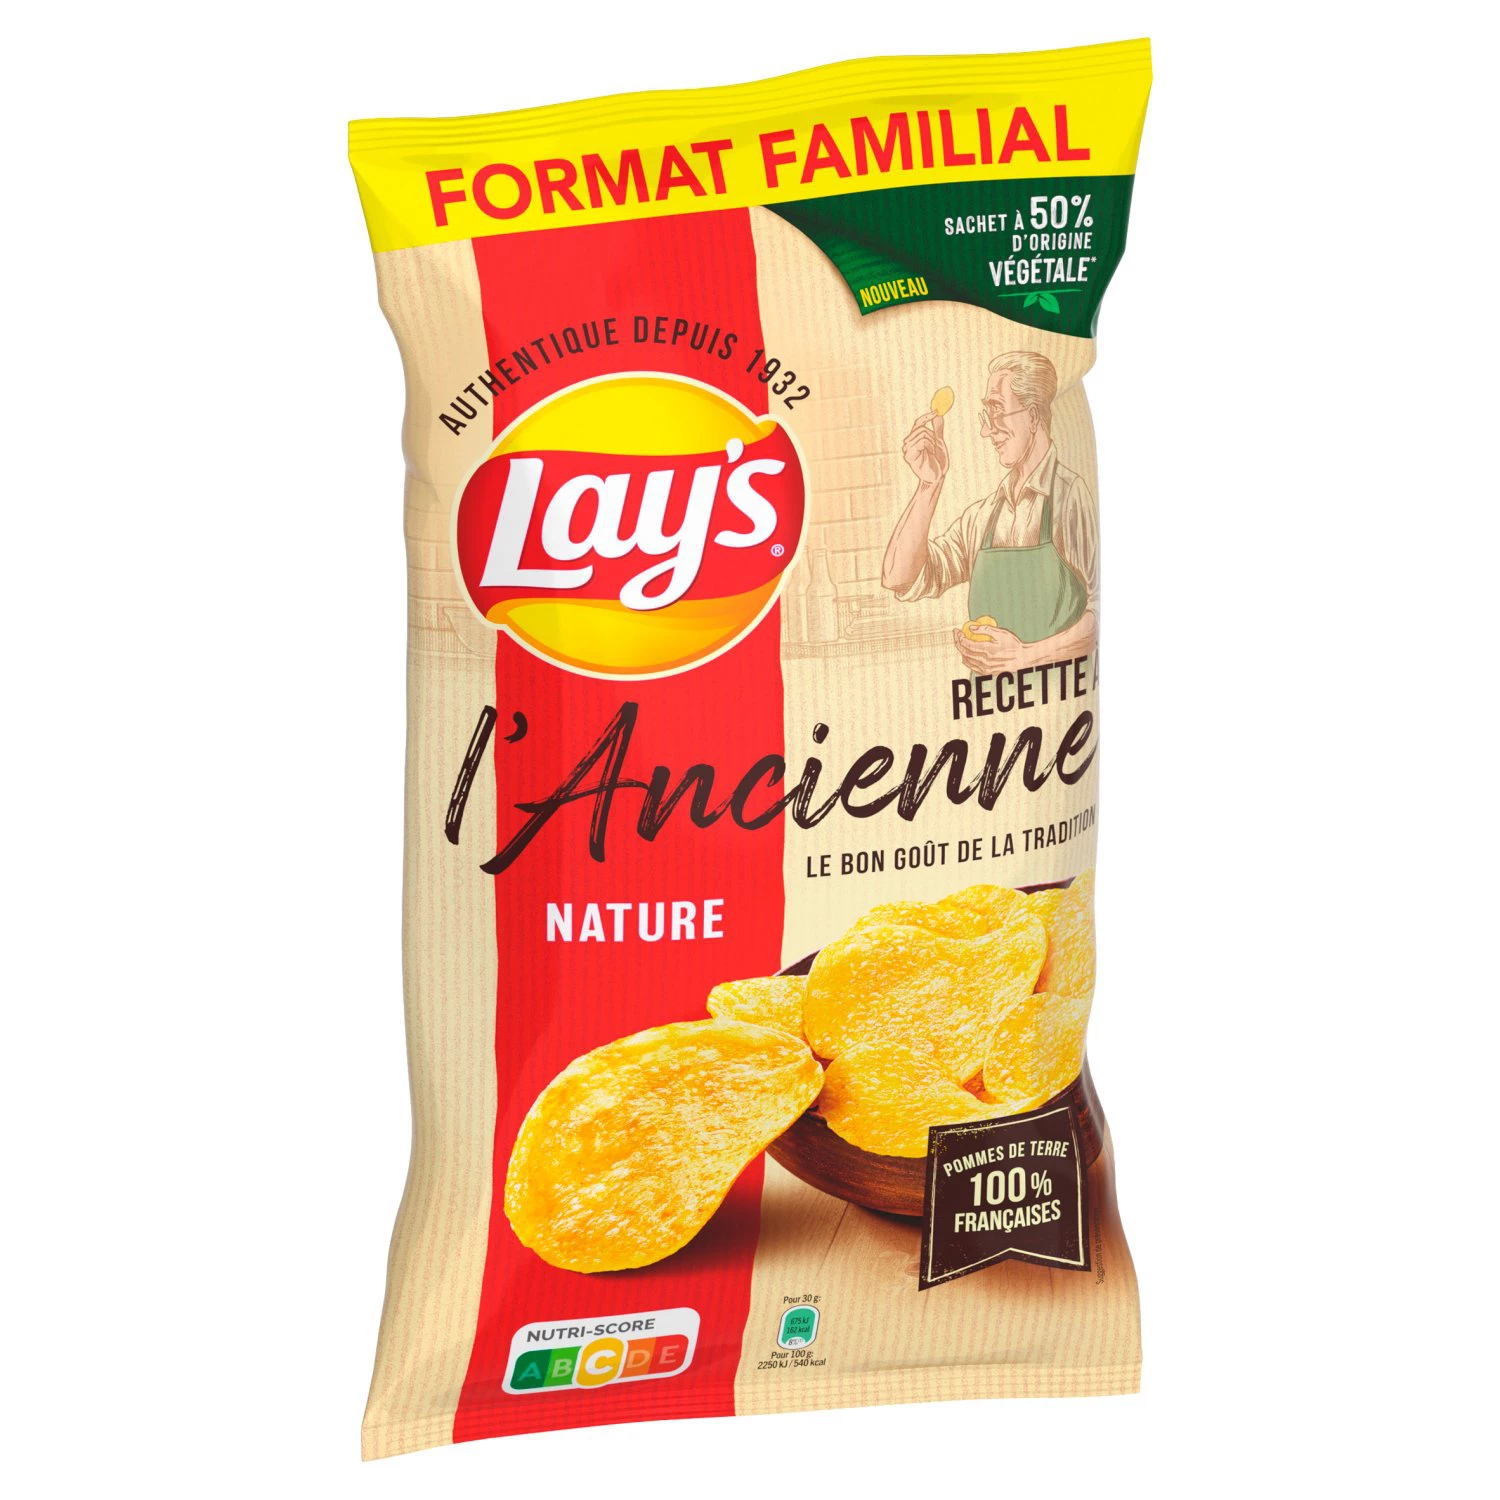 Family Old-Fashioned Chips, 295g - LAY'S